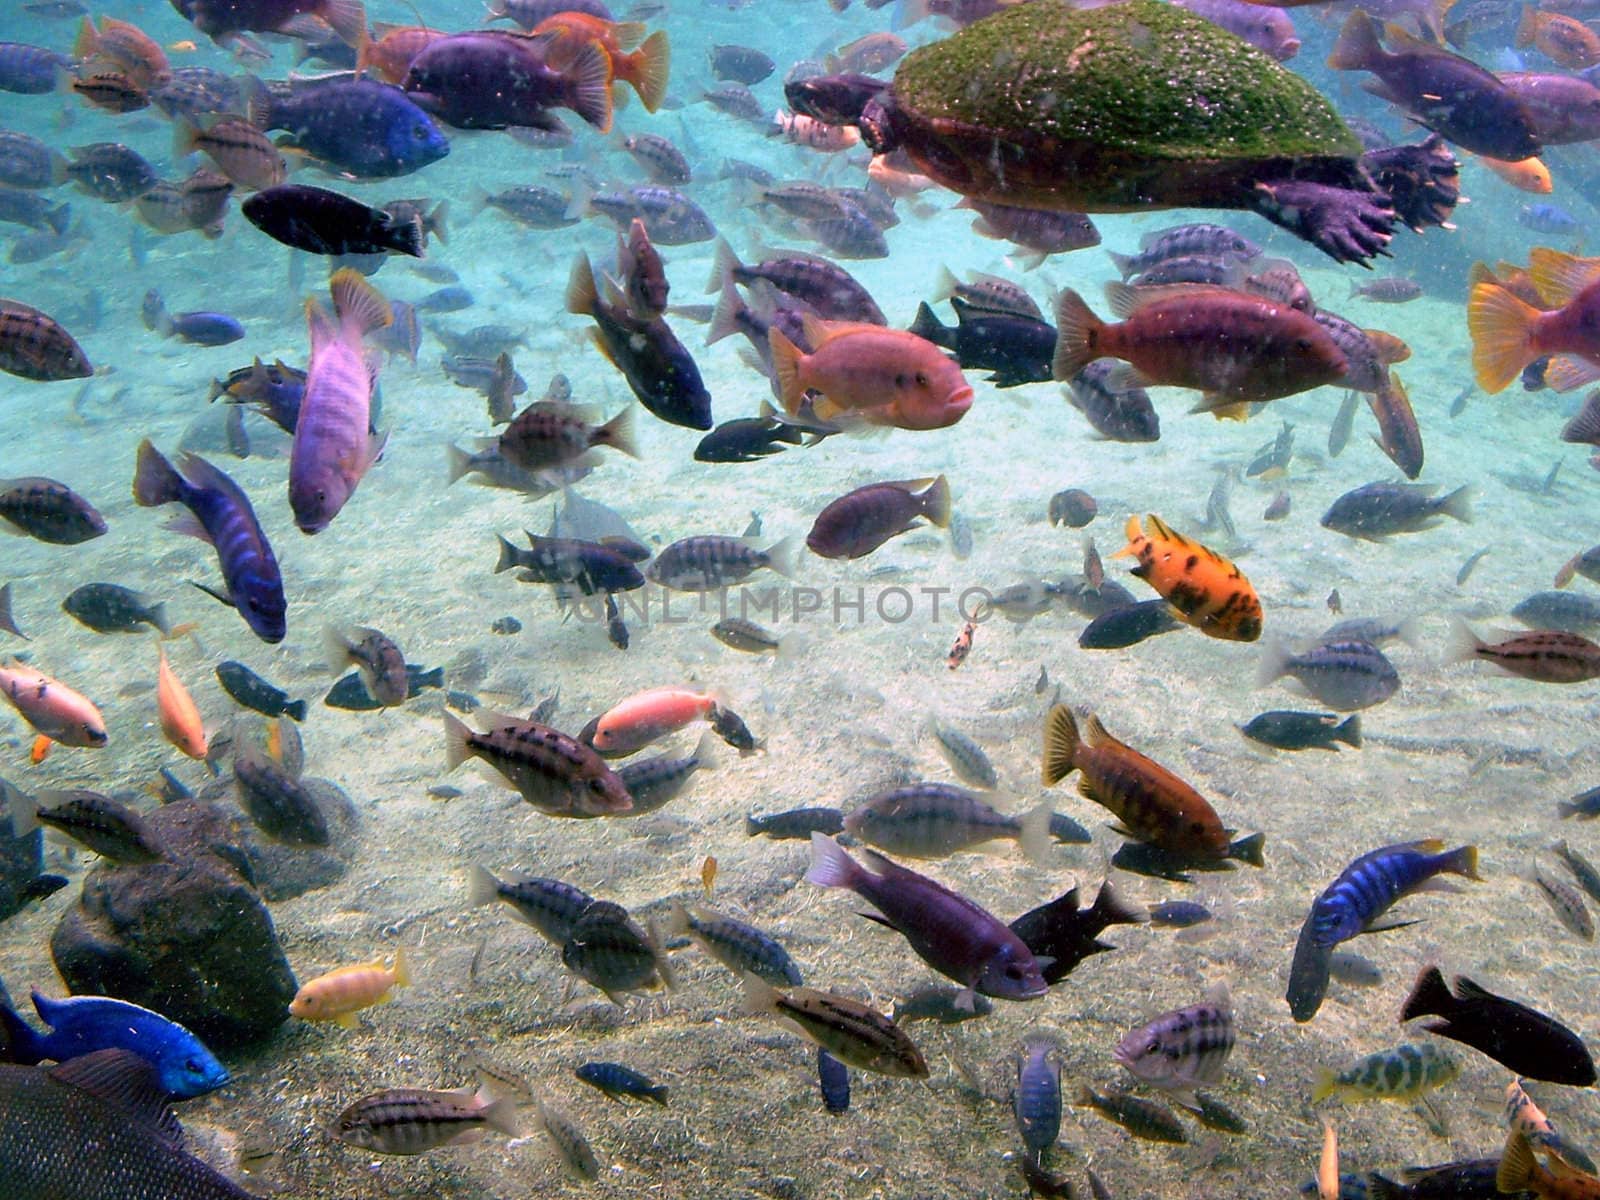 Aquatic Gathering 2 by PhotoWorks